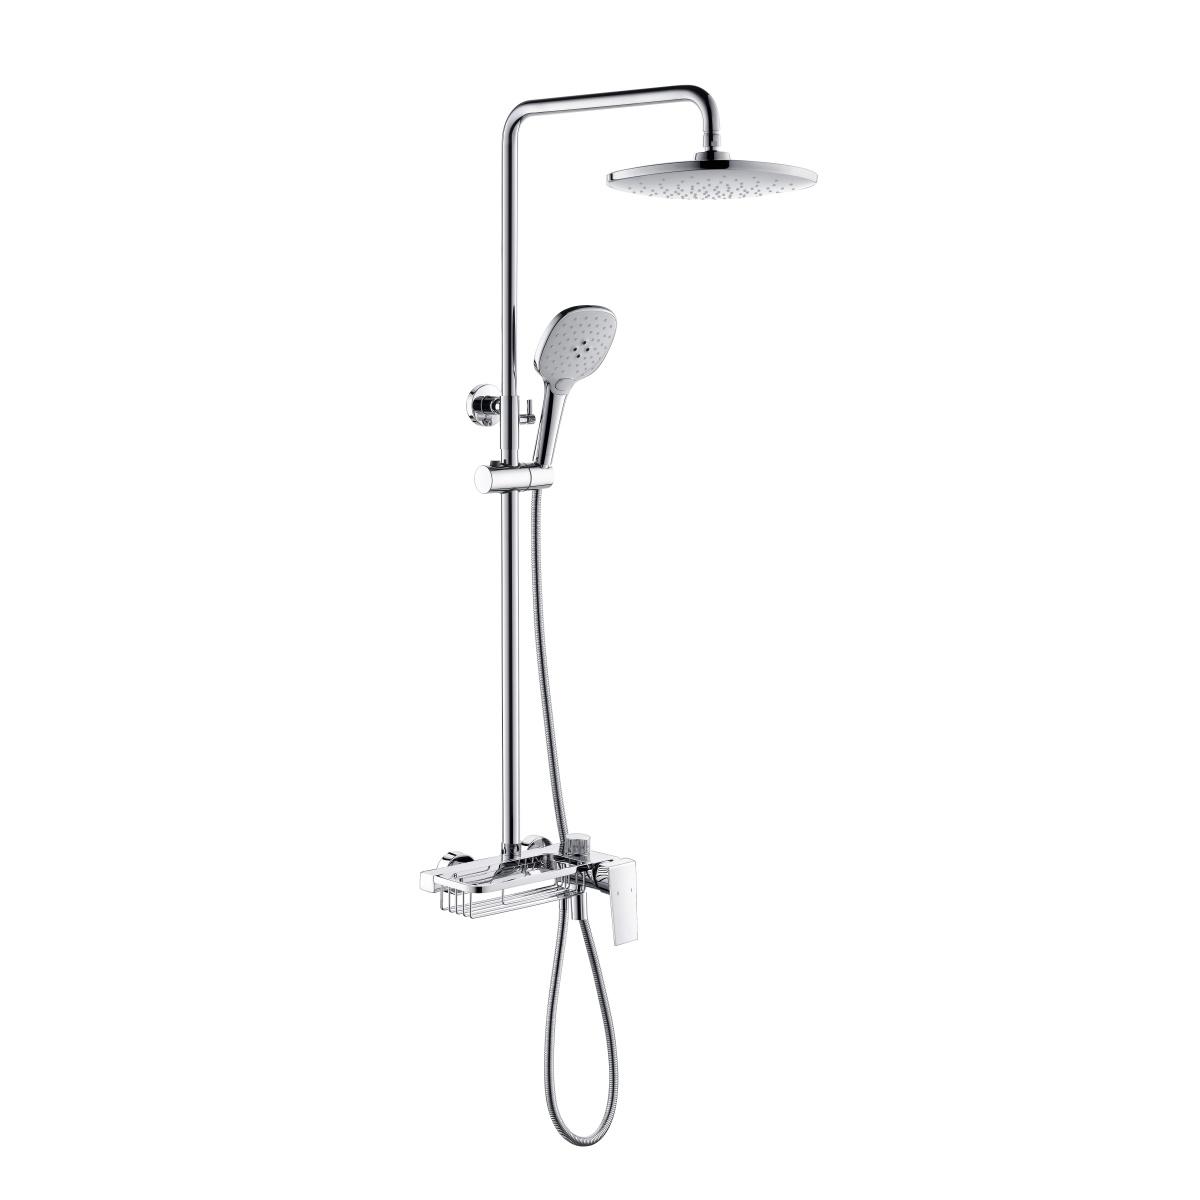 YS34249	Multi-purpose shower column, rain shower column with faucet, spout and basket, height adjustable;